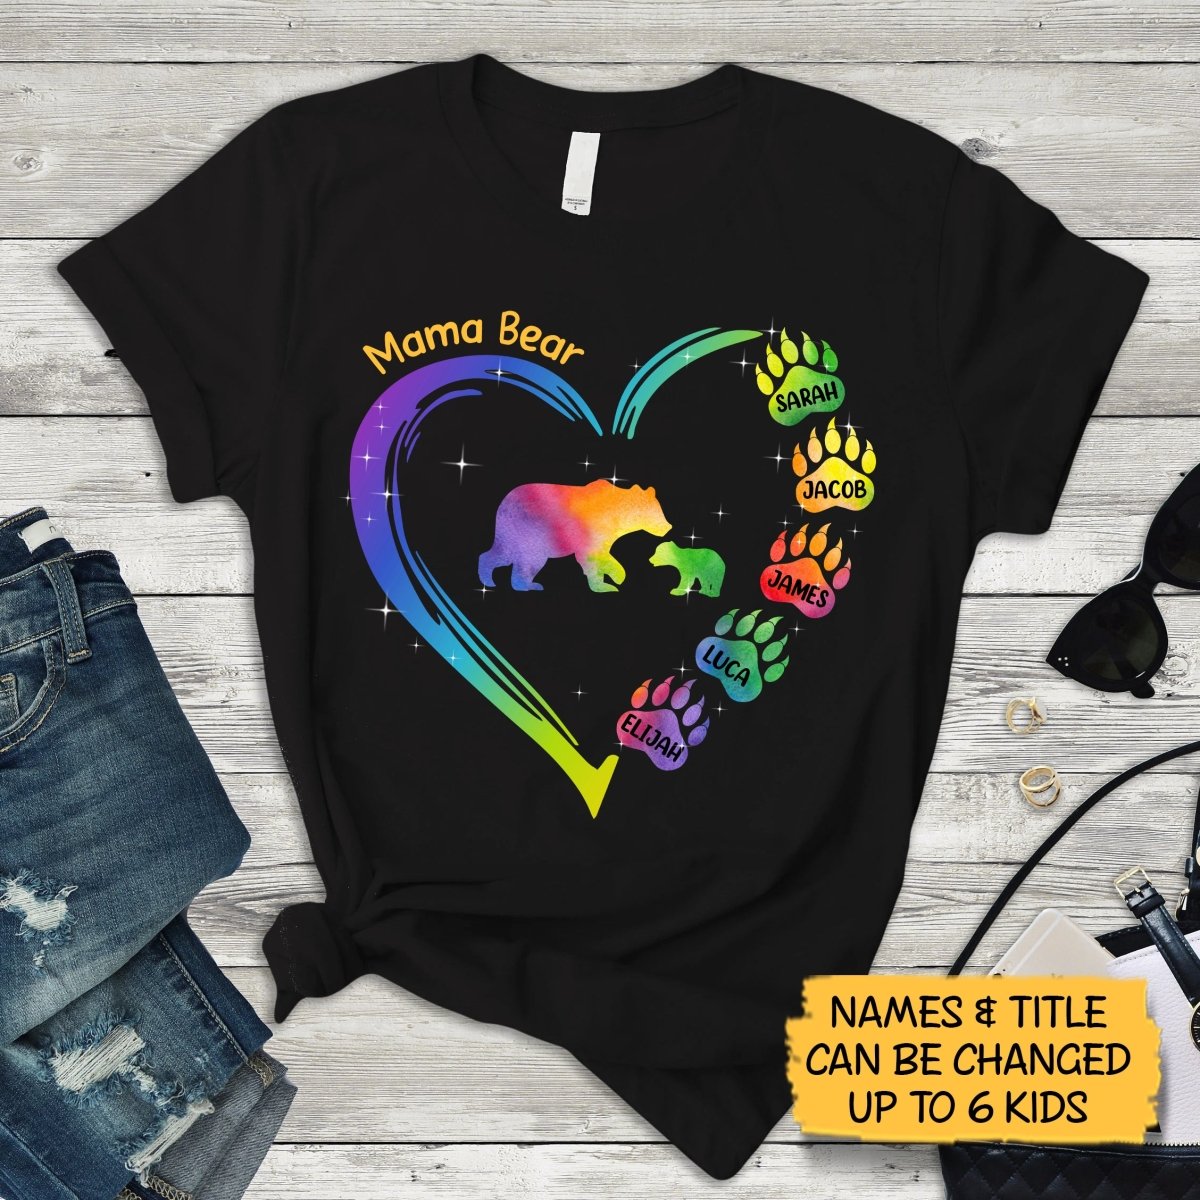 Mama Bear Colorful - Personalized T-Shirt/ Hoodie Front - Best Gift For Mother